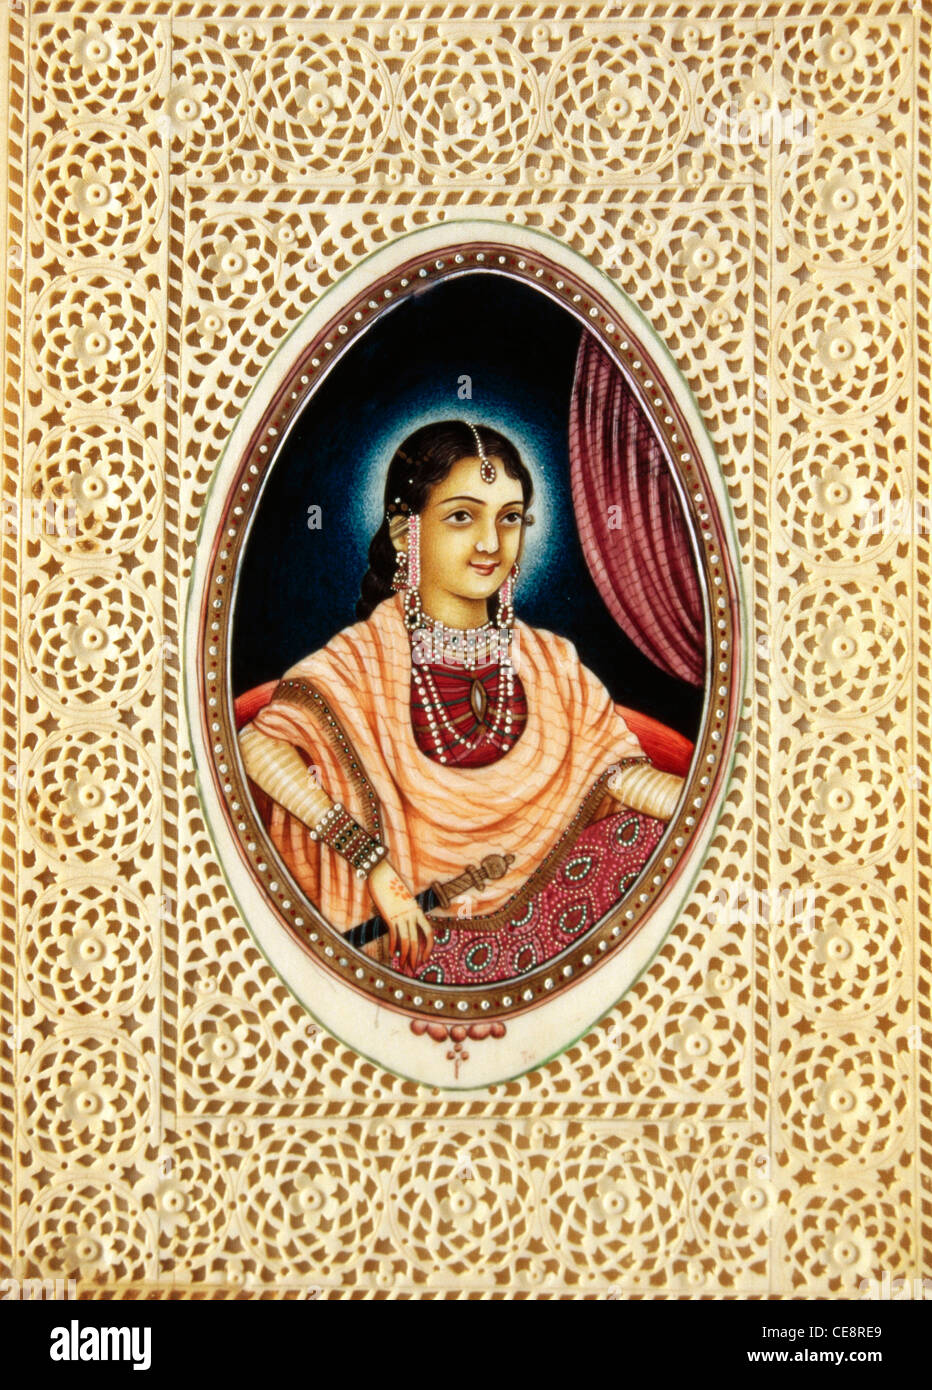 Mumtaz Mahal ; Mughal Empress ; Miniature Painting on Ivory ; India ; Asia ; Indian ; Asian ; old vintage 1700s painting Stock Photo